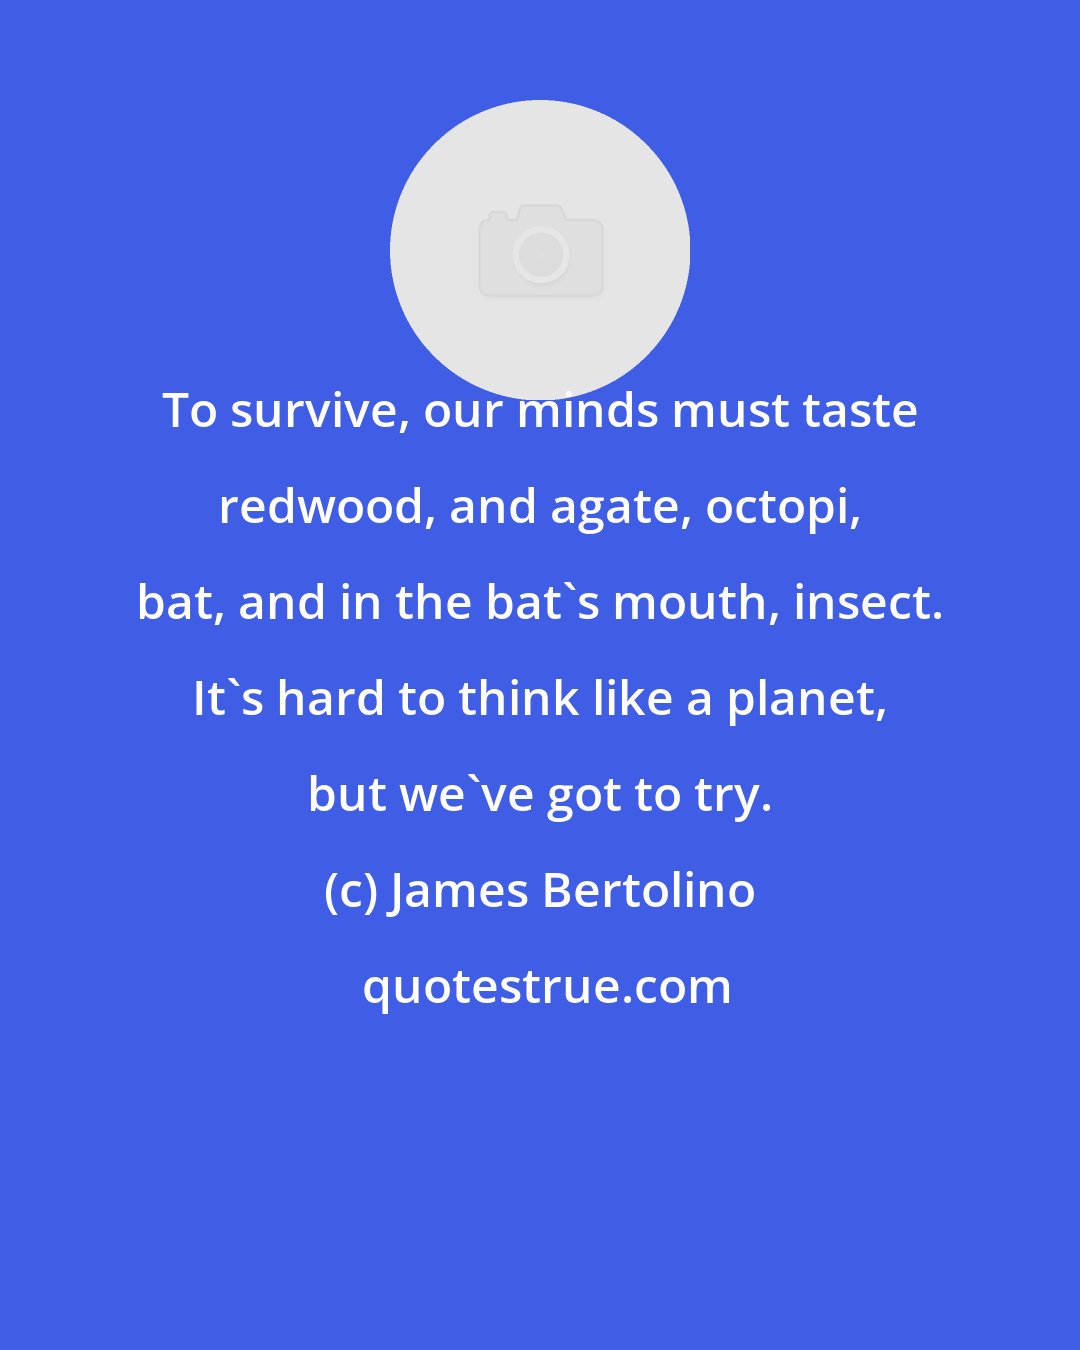 James Bertolino: To survive, our minds must taste redwood, and agate, octopi, bat, and in the bat's mouth, insect. It's hard to think like a planet, but we've got to try.